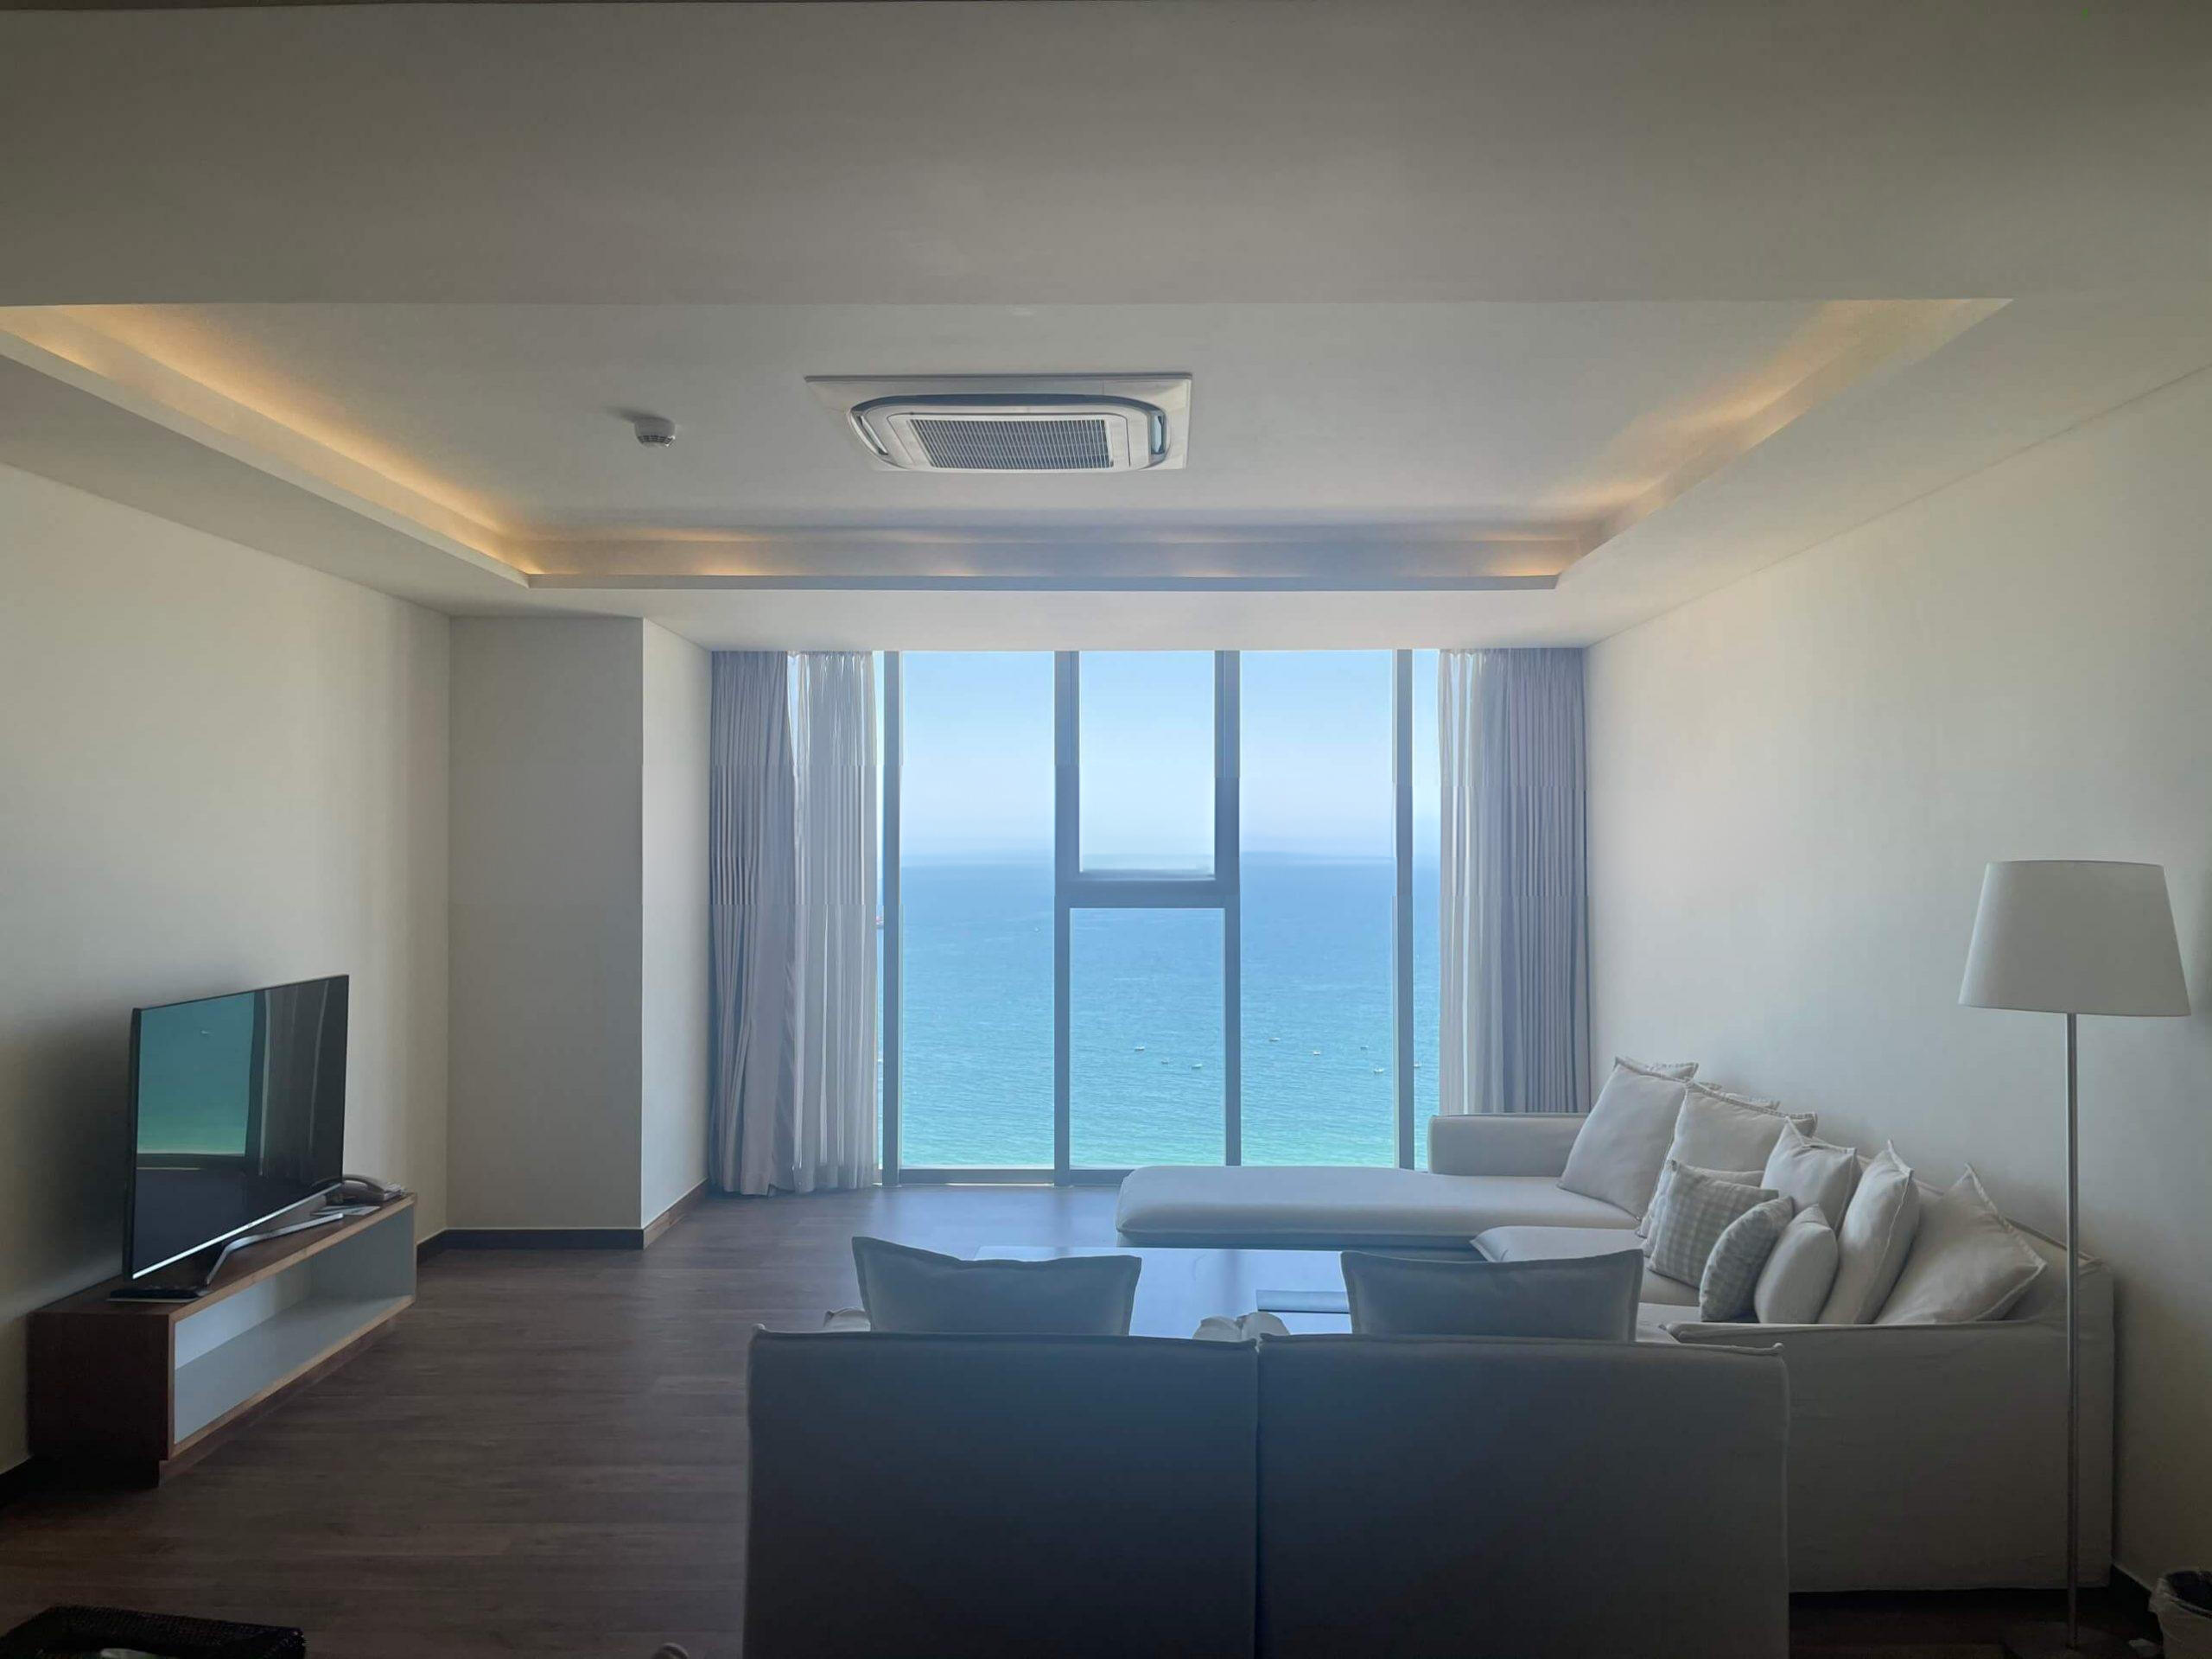 For sale: ALaCarte apartment, 2 bedrooms, direct ocean view in Đà Nẵng.